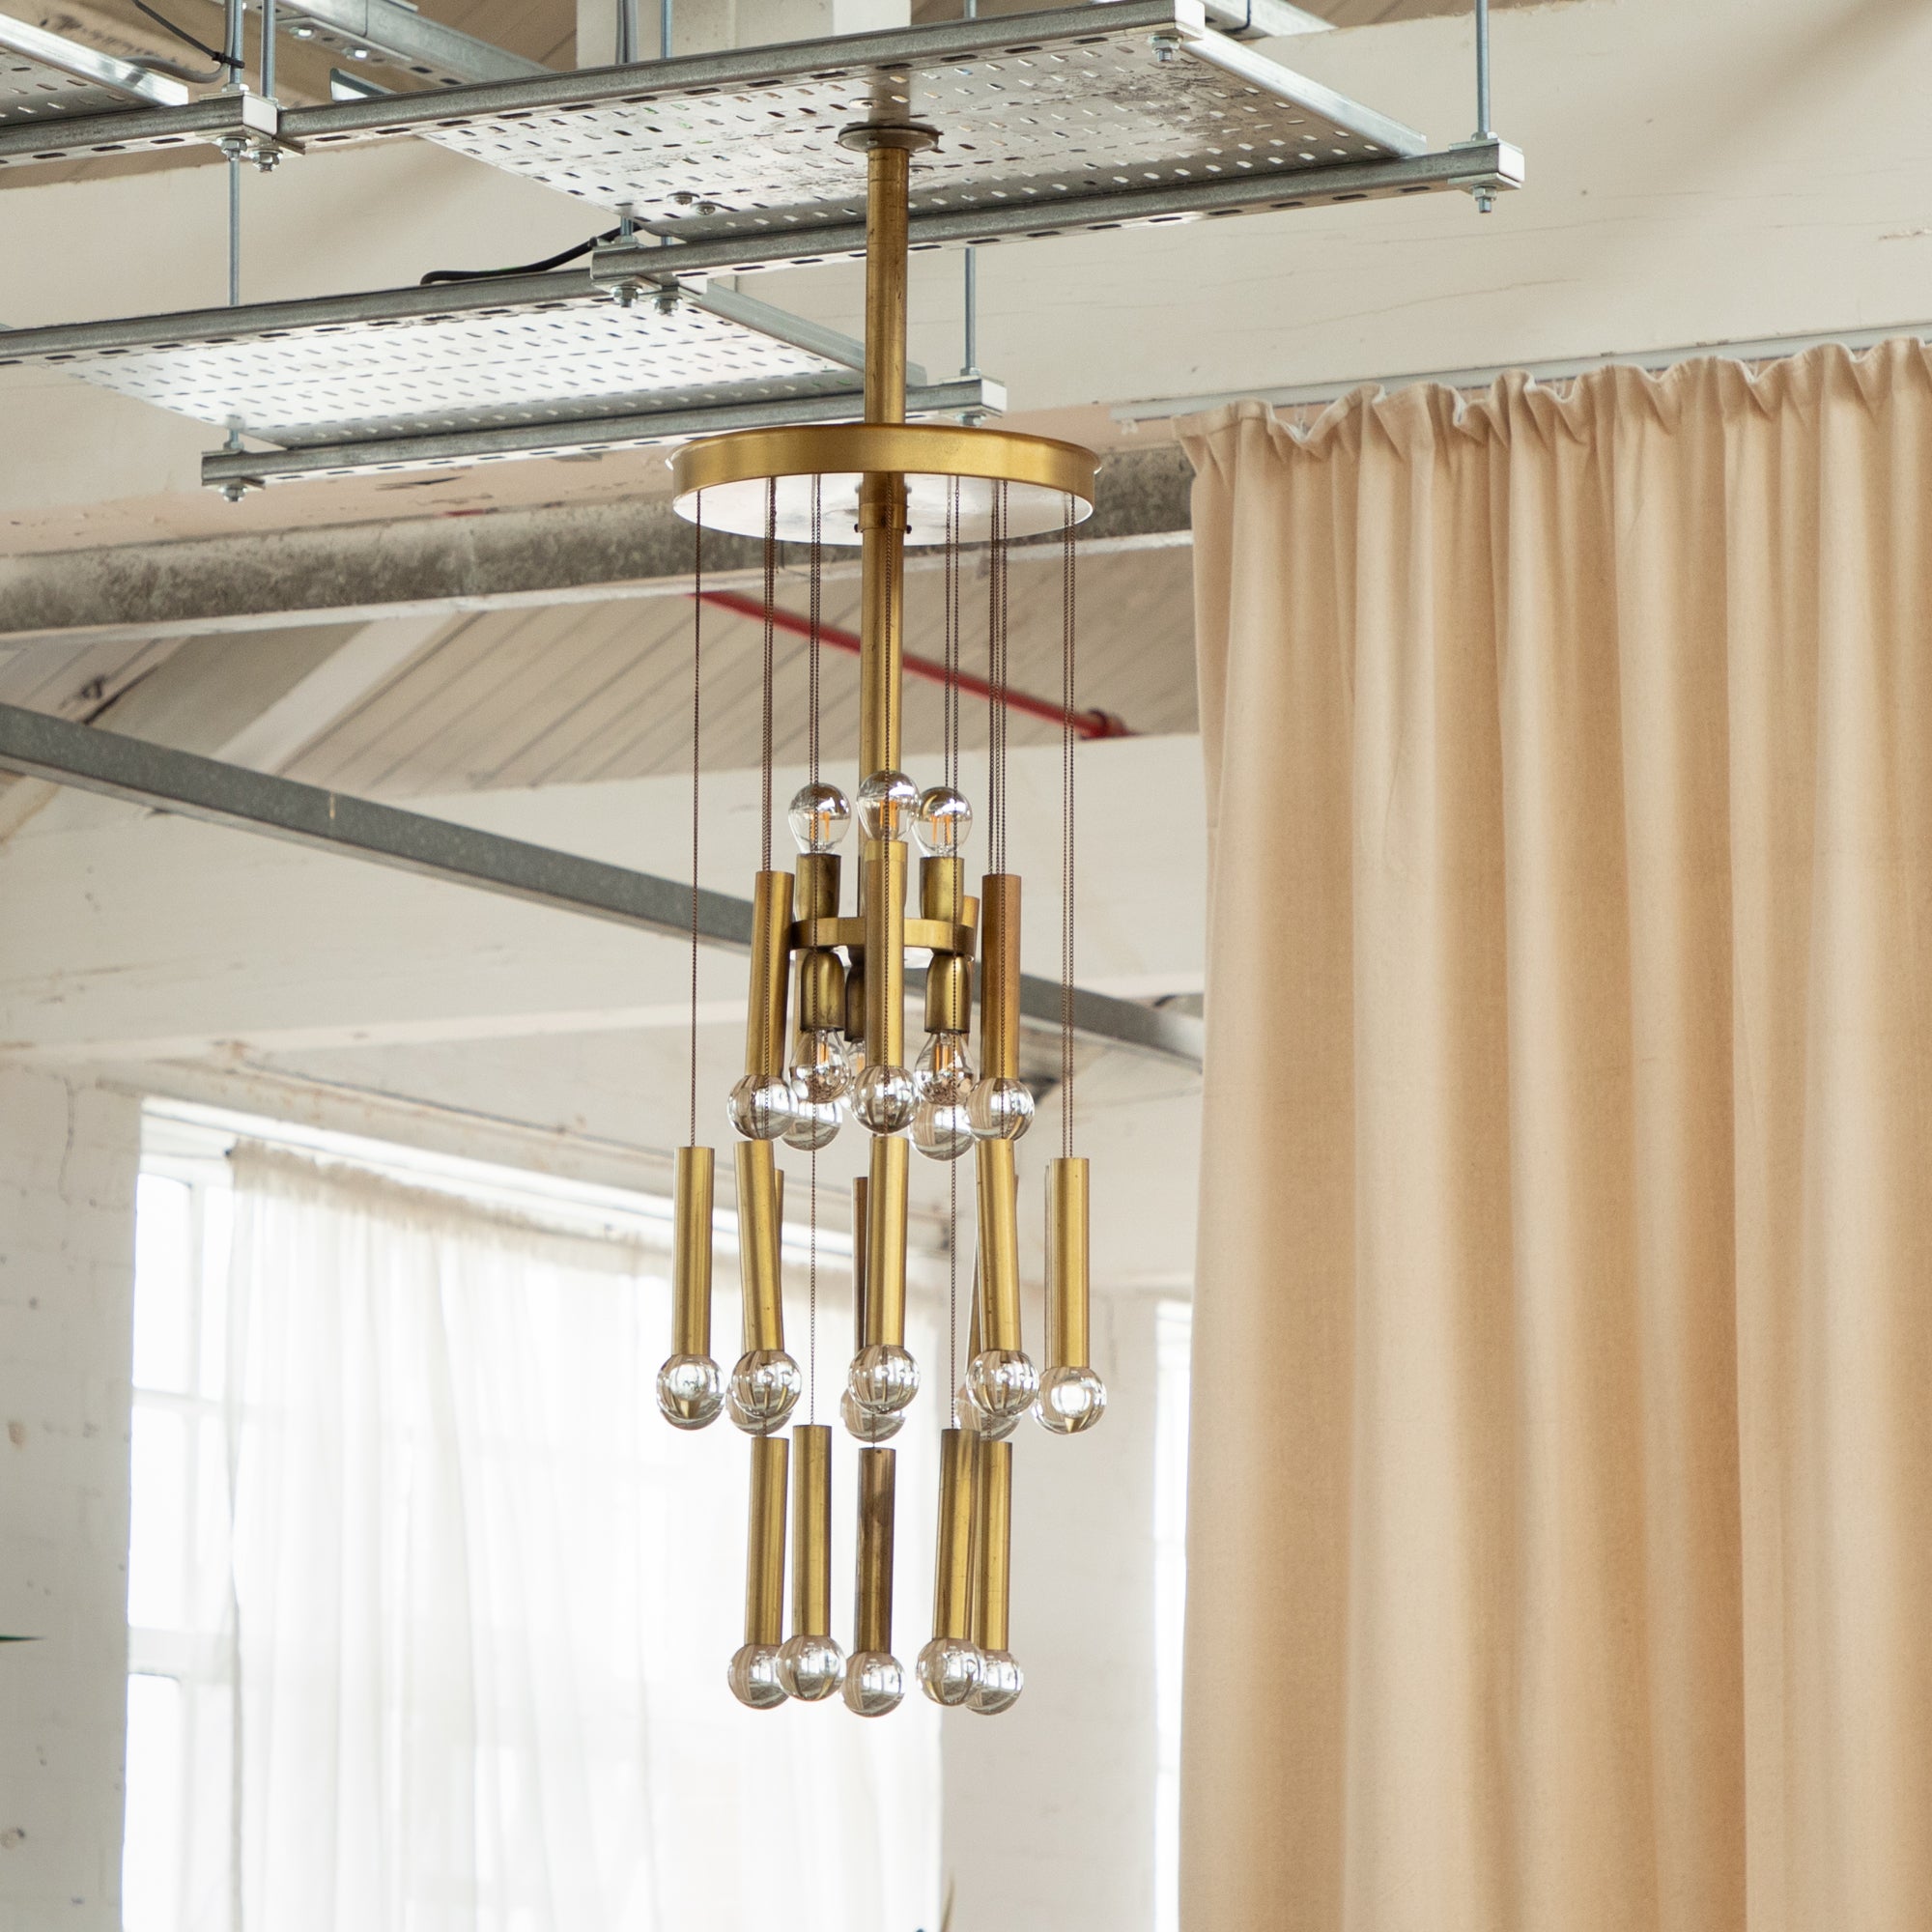 1970s brass and glass chandelier. Long brass chains with tubular brass and glass domes. The central section fits to the ceiling and holds four bulb holders to the upper level. The light reflects and refracts beautifully on to the lower glass